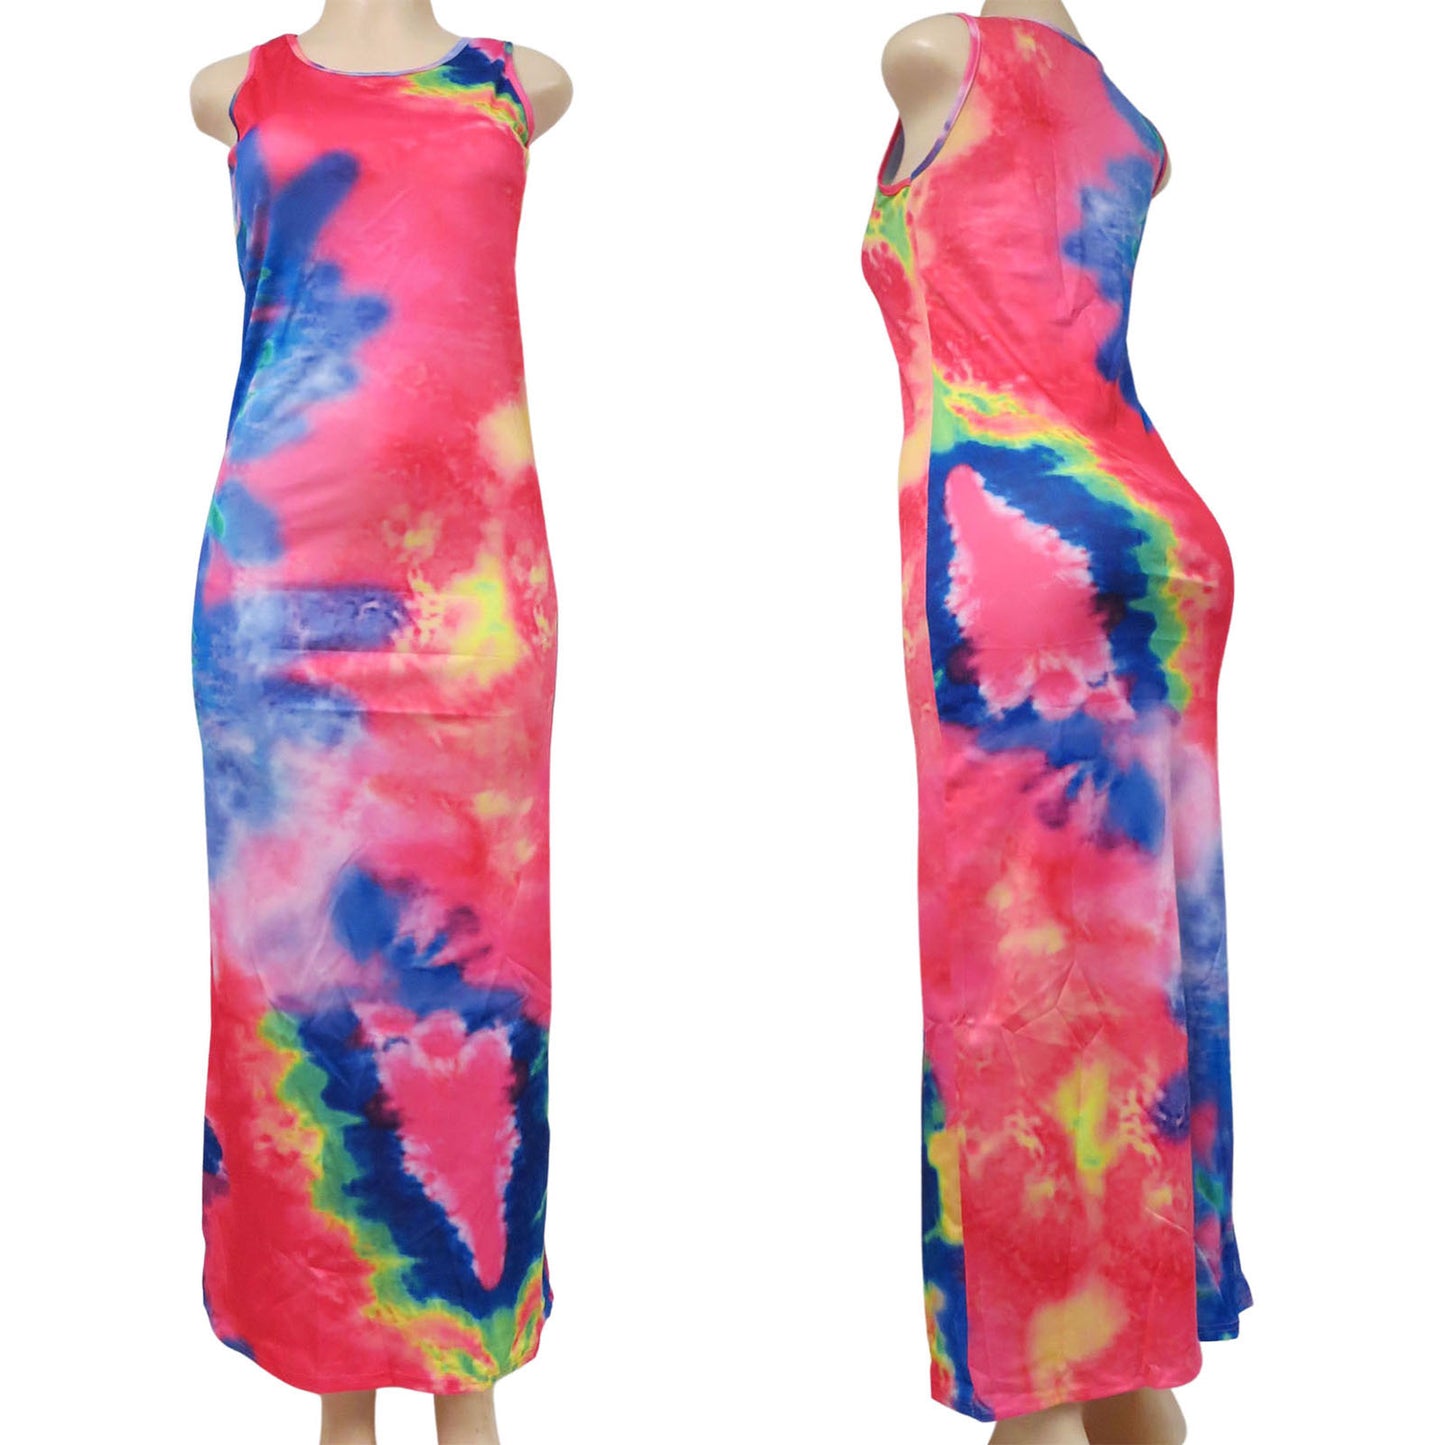 wholesale tie dye long sleeveless dress for women in multicolor pink with yellow green and blue